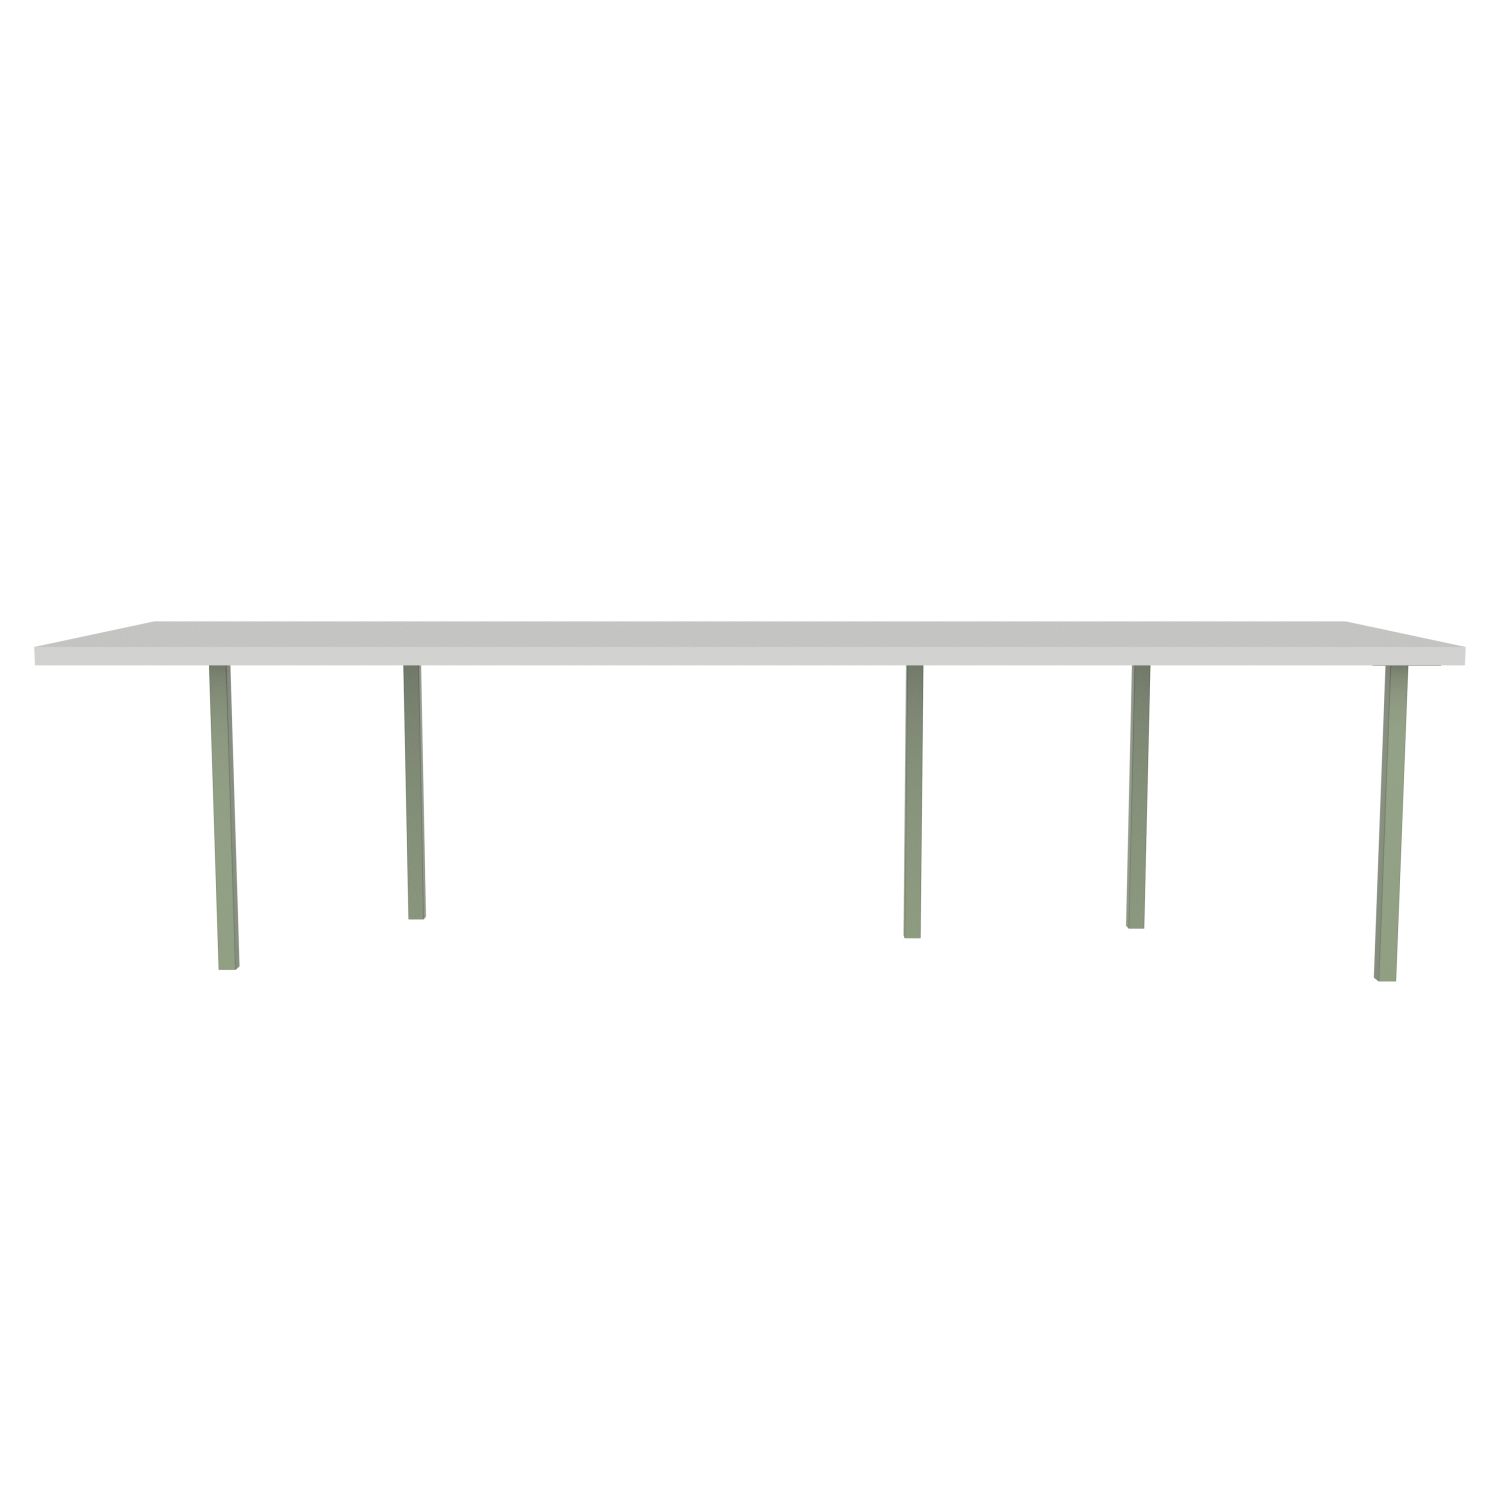 lensvelt bbrand table five fixed heigt 915x310 hpl boring grey 50 mm price level 1 green ral6021